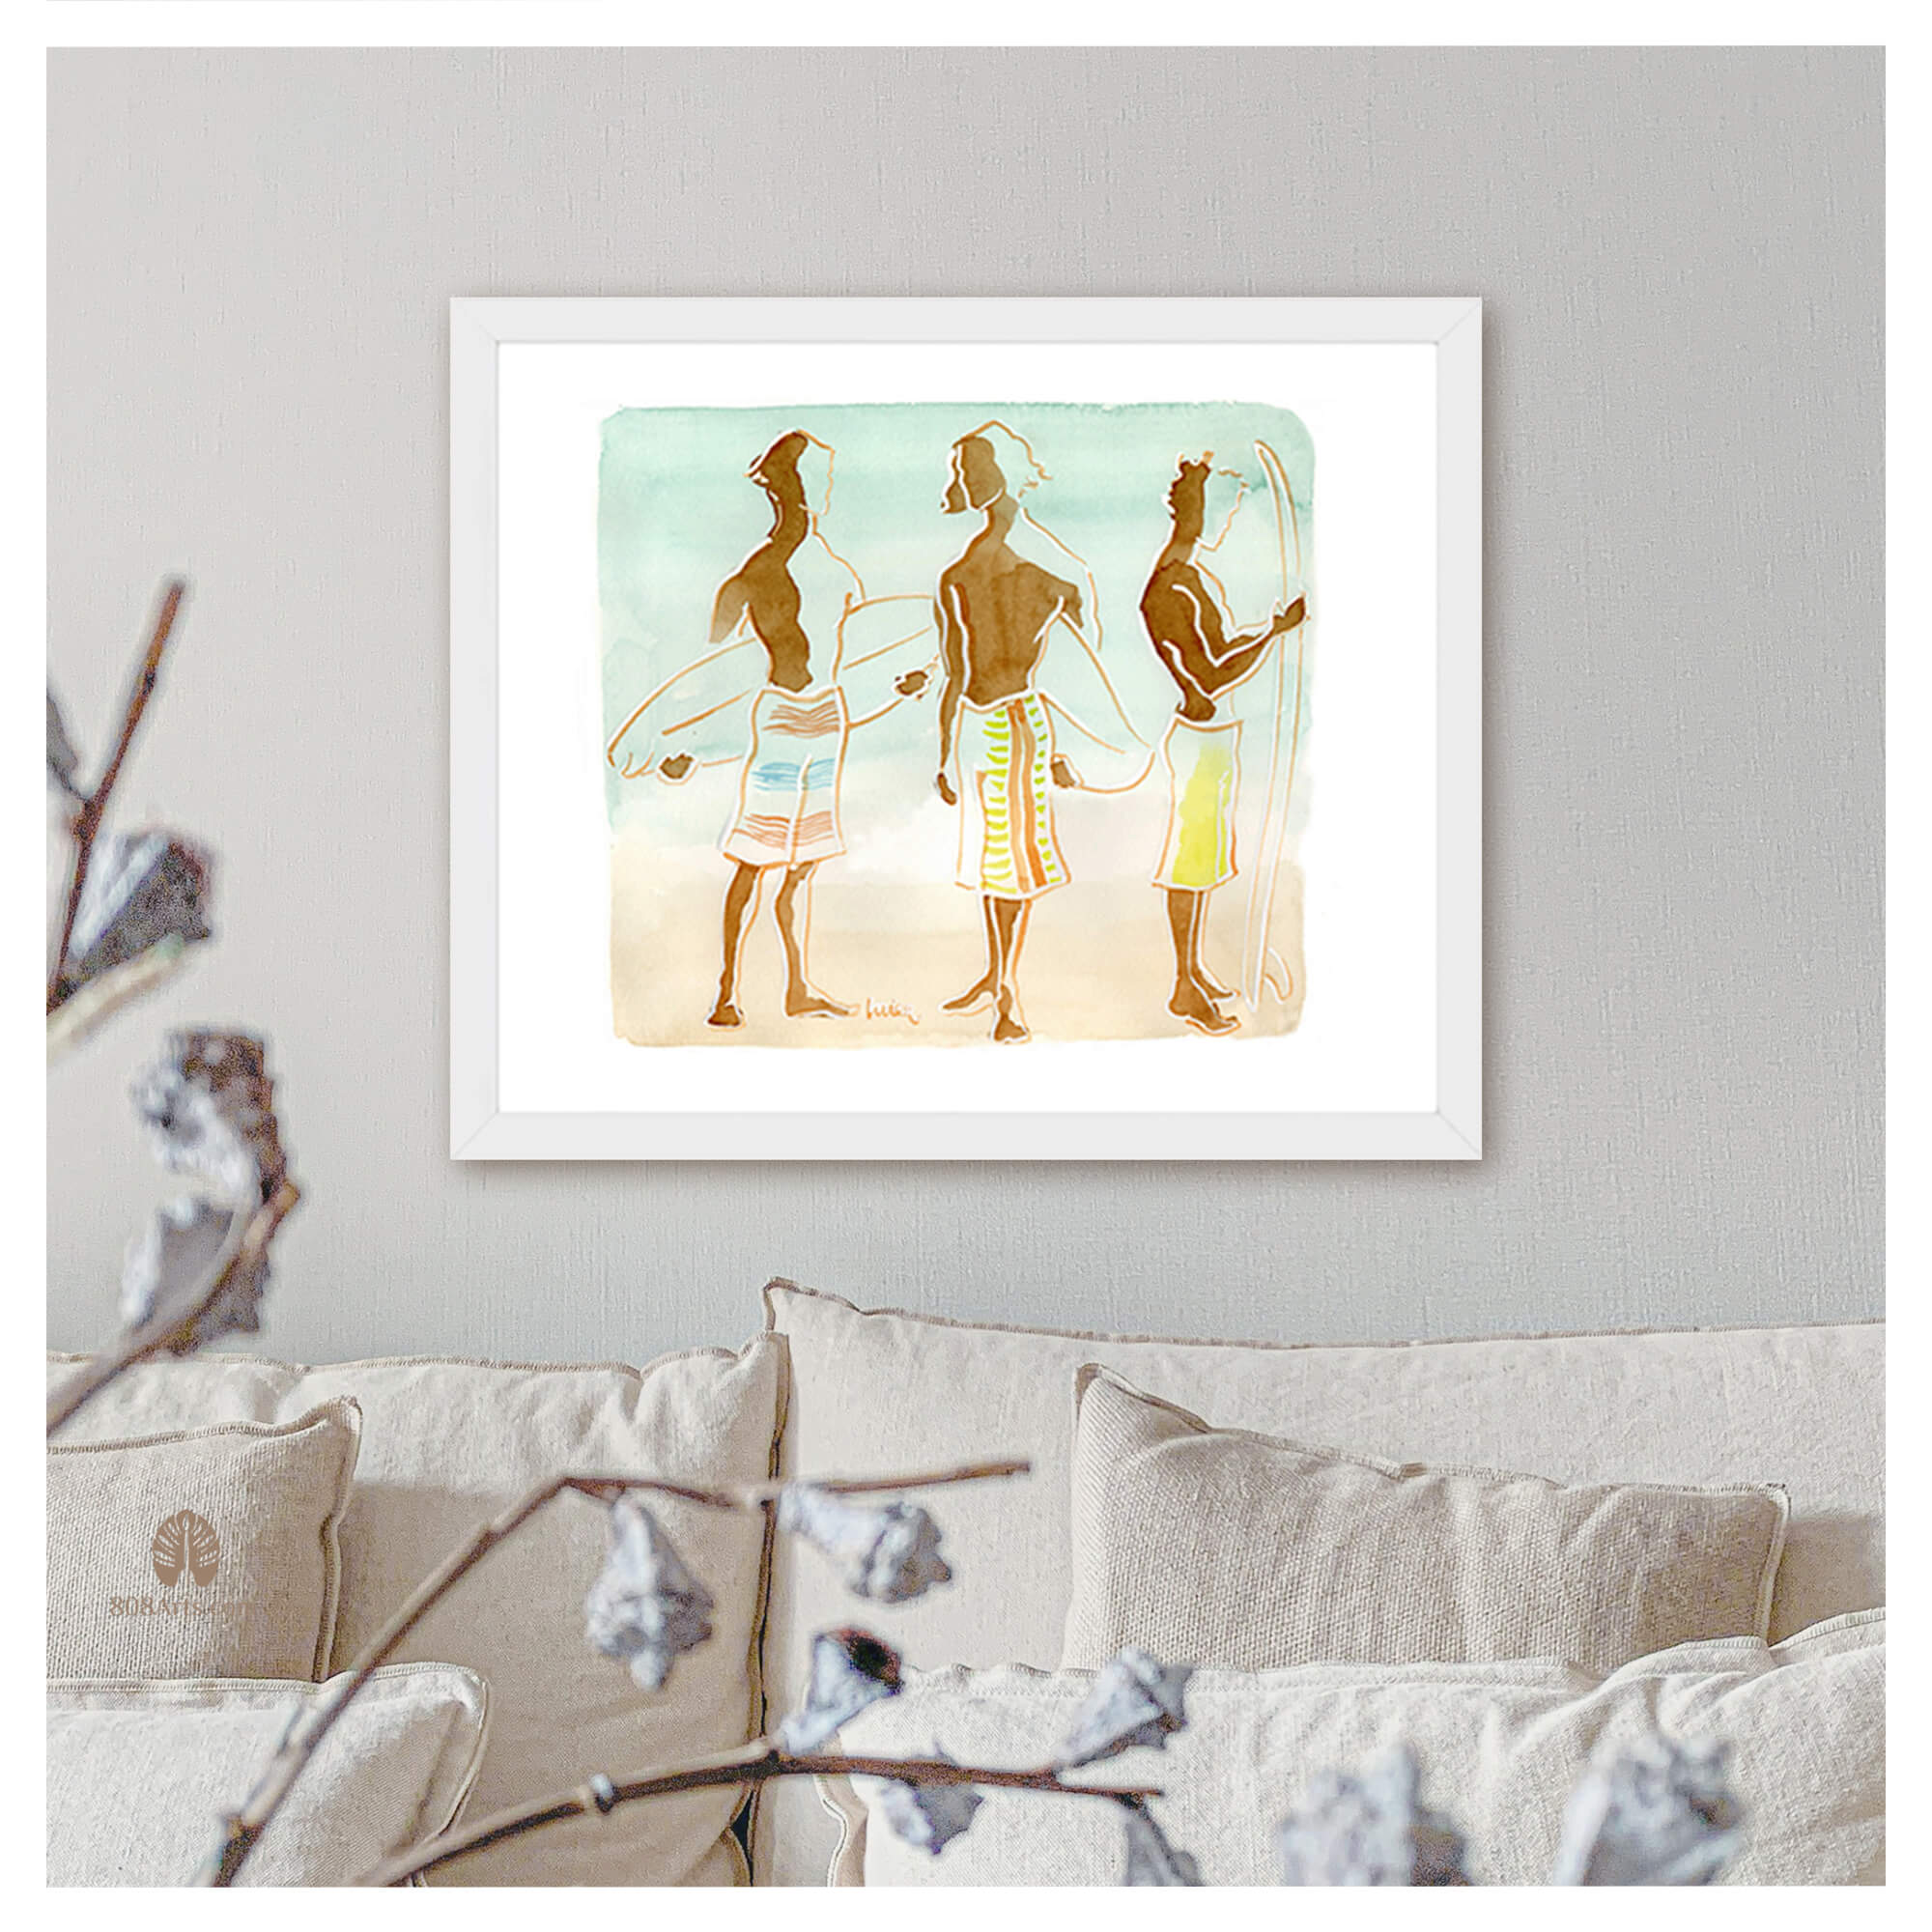 Framed paper giclée print of a watercolor artwork featuring three men surfers with surfboards by Hawaii artist Lovisa Oliv